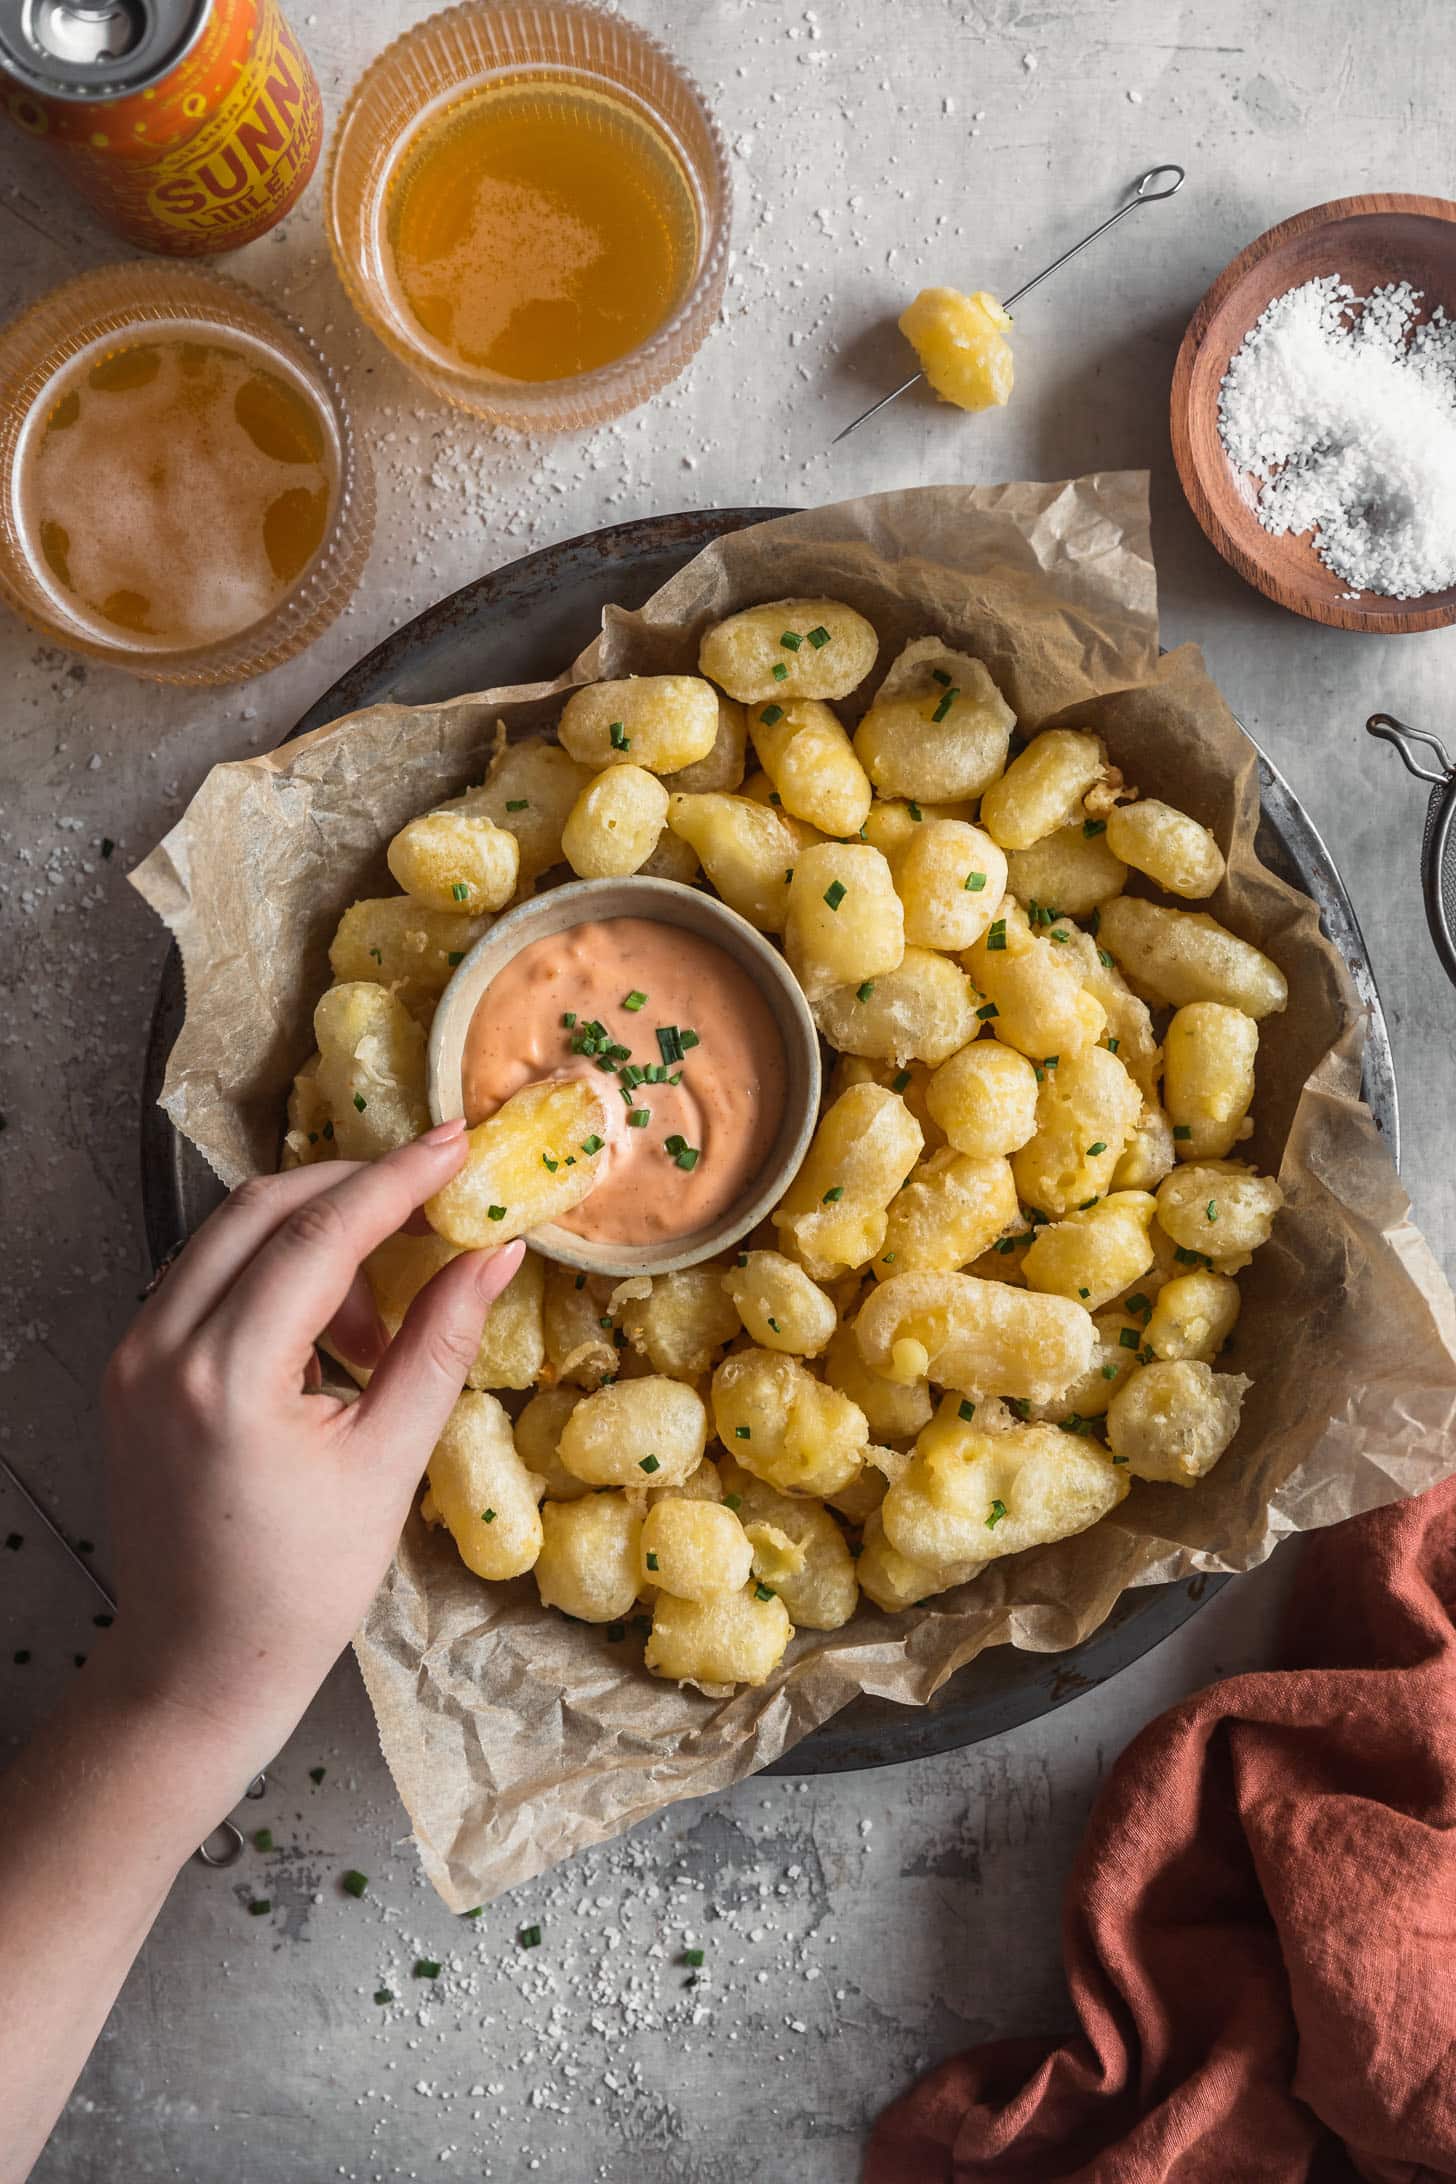 A hand dipping tempura fried cheese curds in Sriracha mayo on a plate of cheese curds next to beer and an orange linen with a grey background.